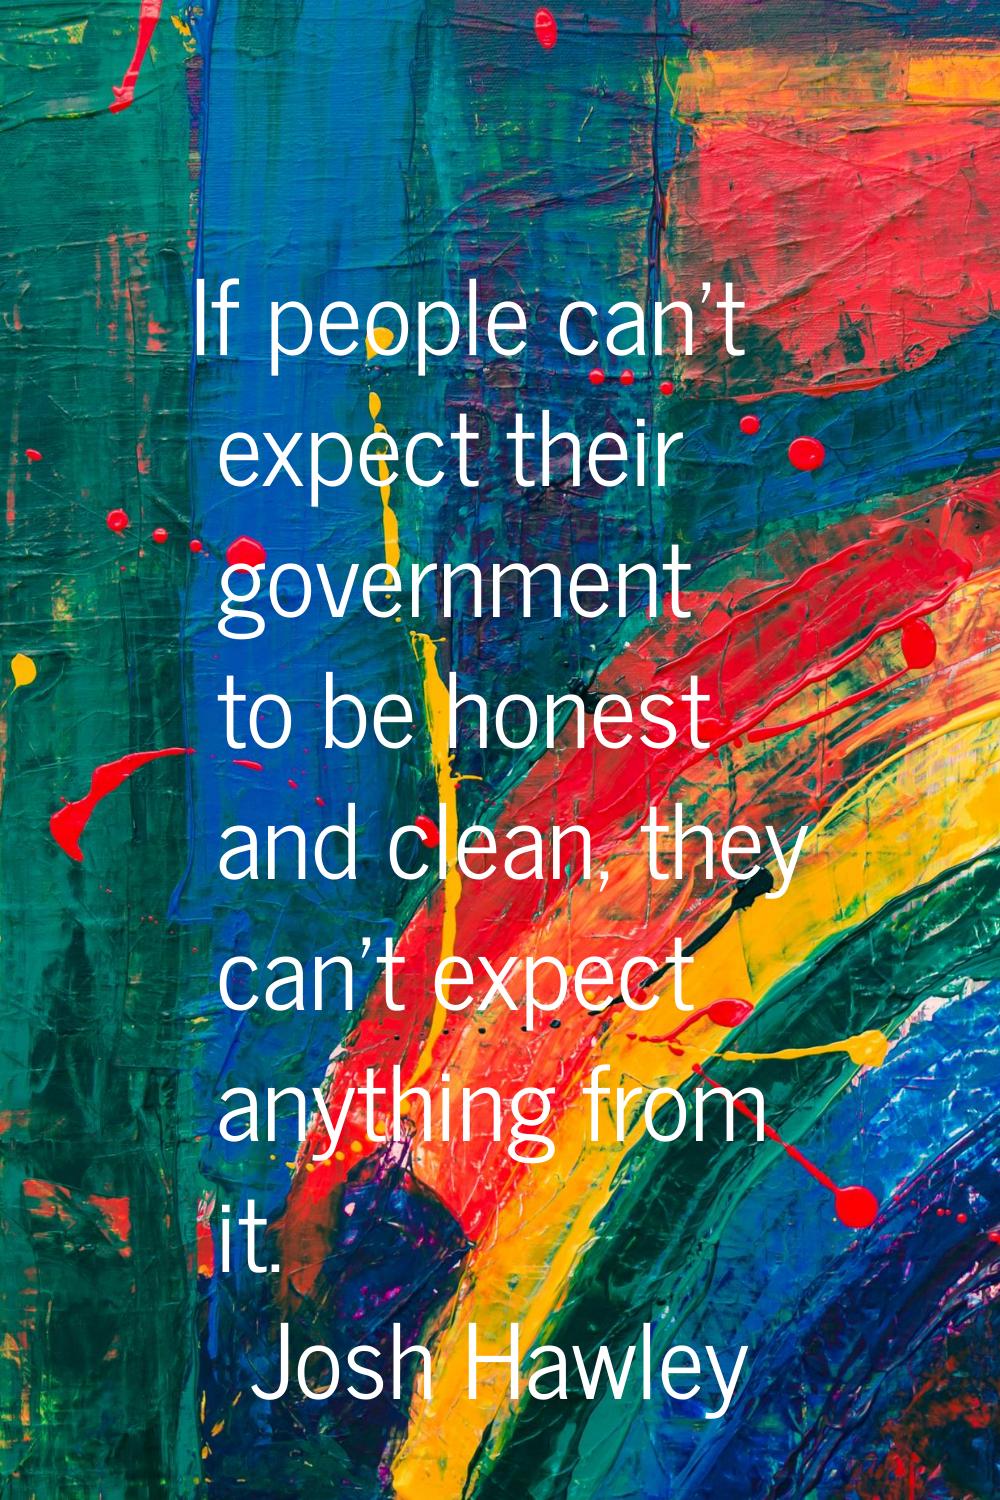 If people can't expect their government to be honest and clean, they can't expect anything from it.